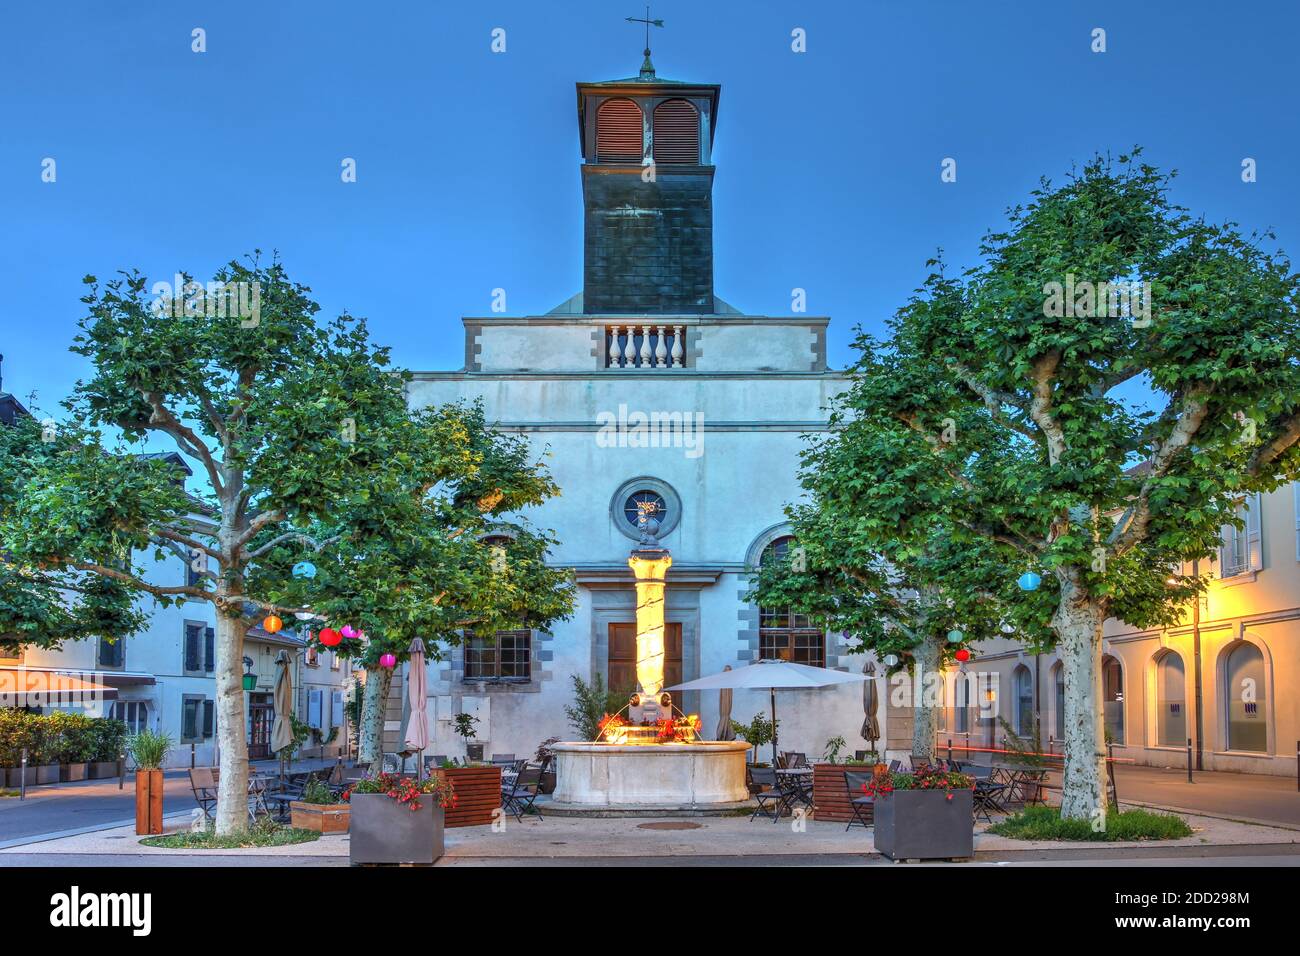 The Protestant Parish in Carouge, Geneva, Switzerland dates back from 1822. Built in neo-classical style the picture captures the rear facade facing t Stock Photo